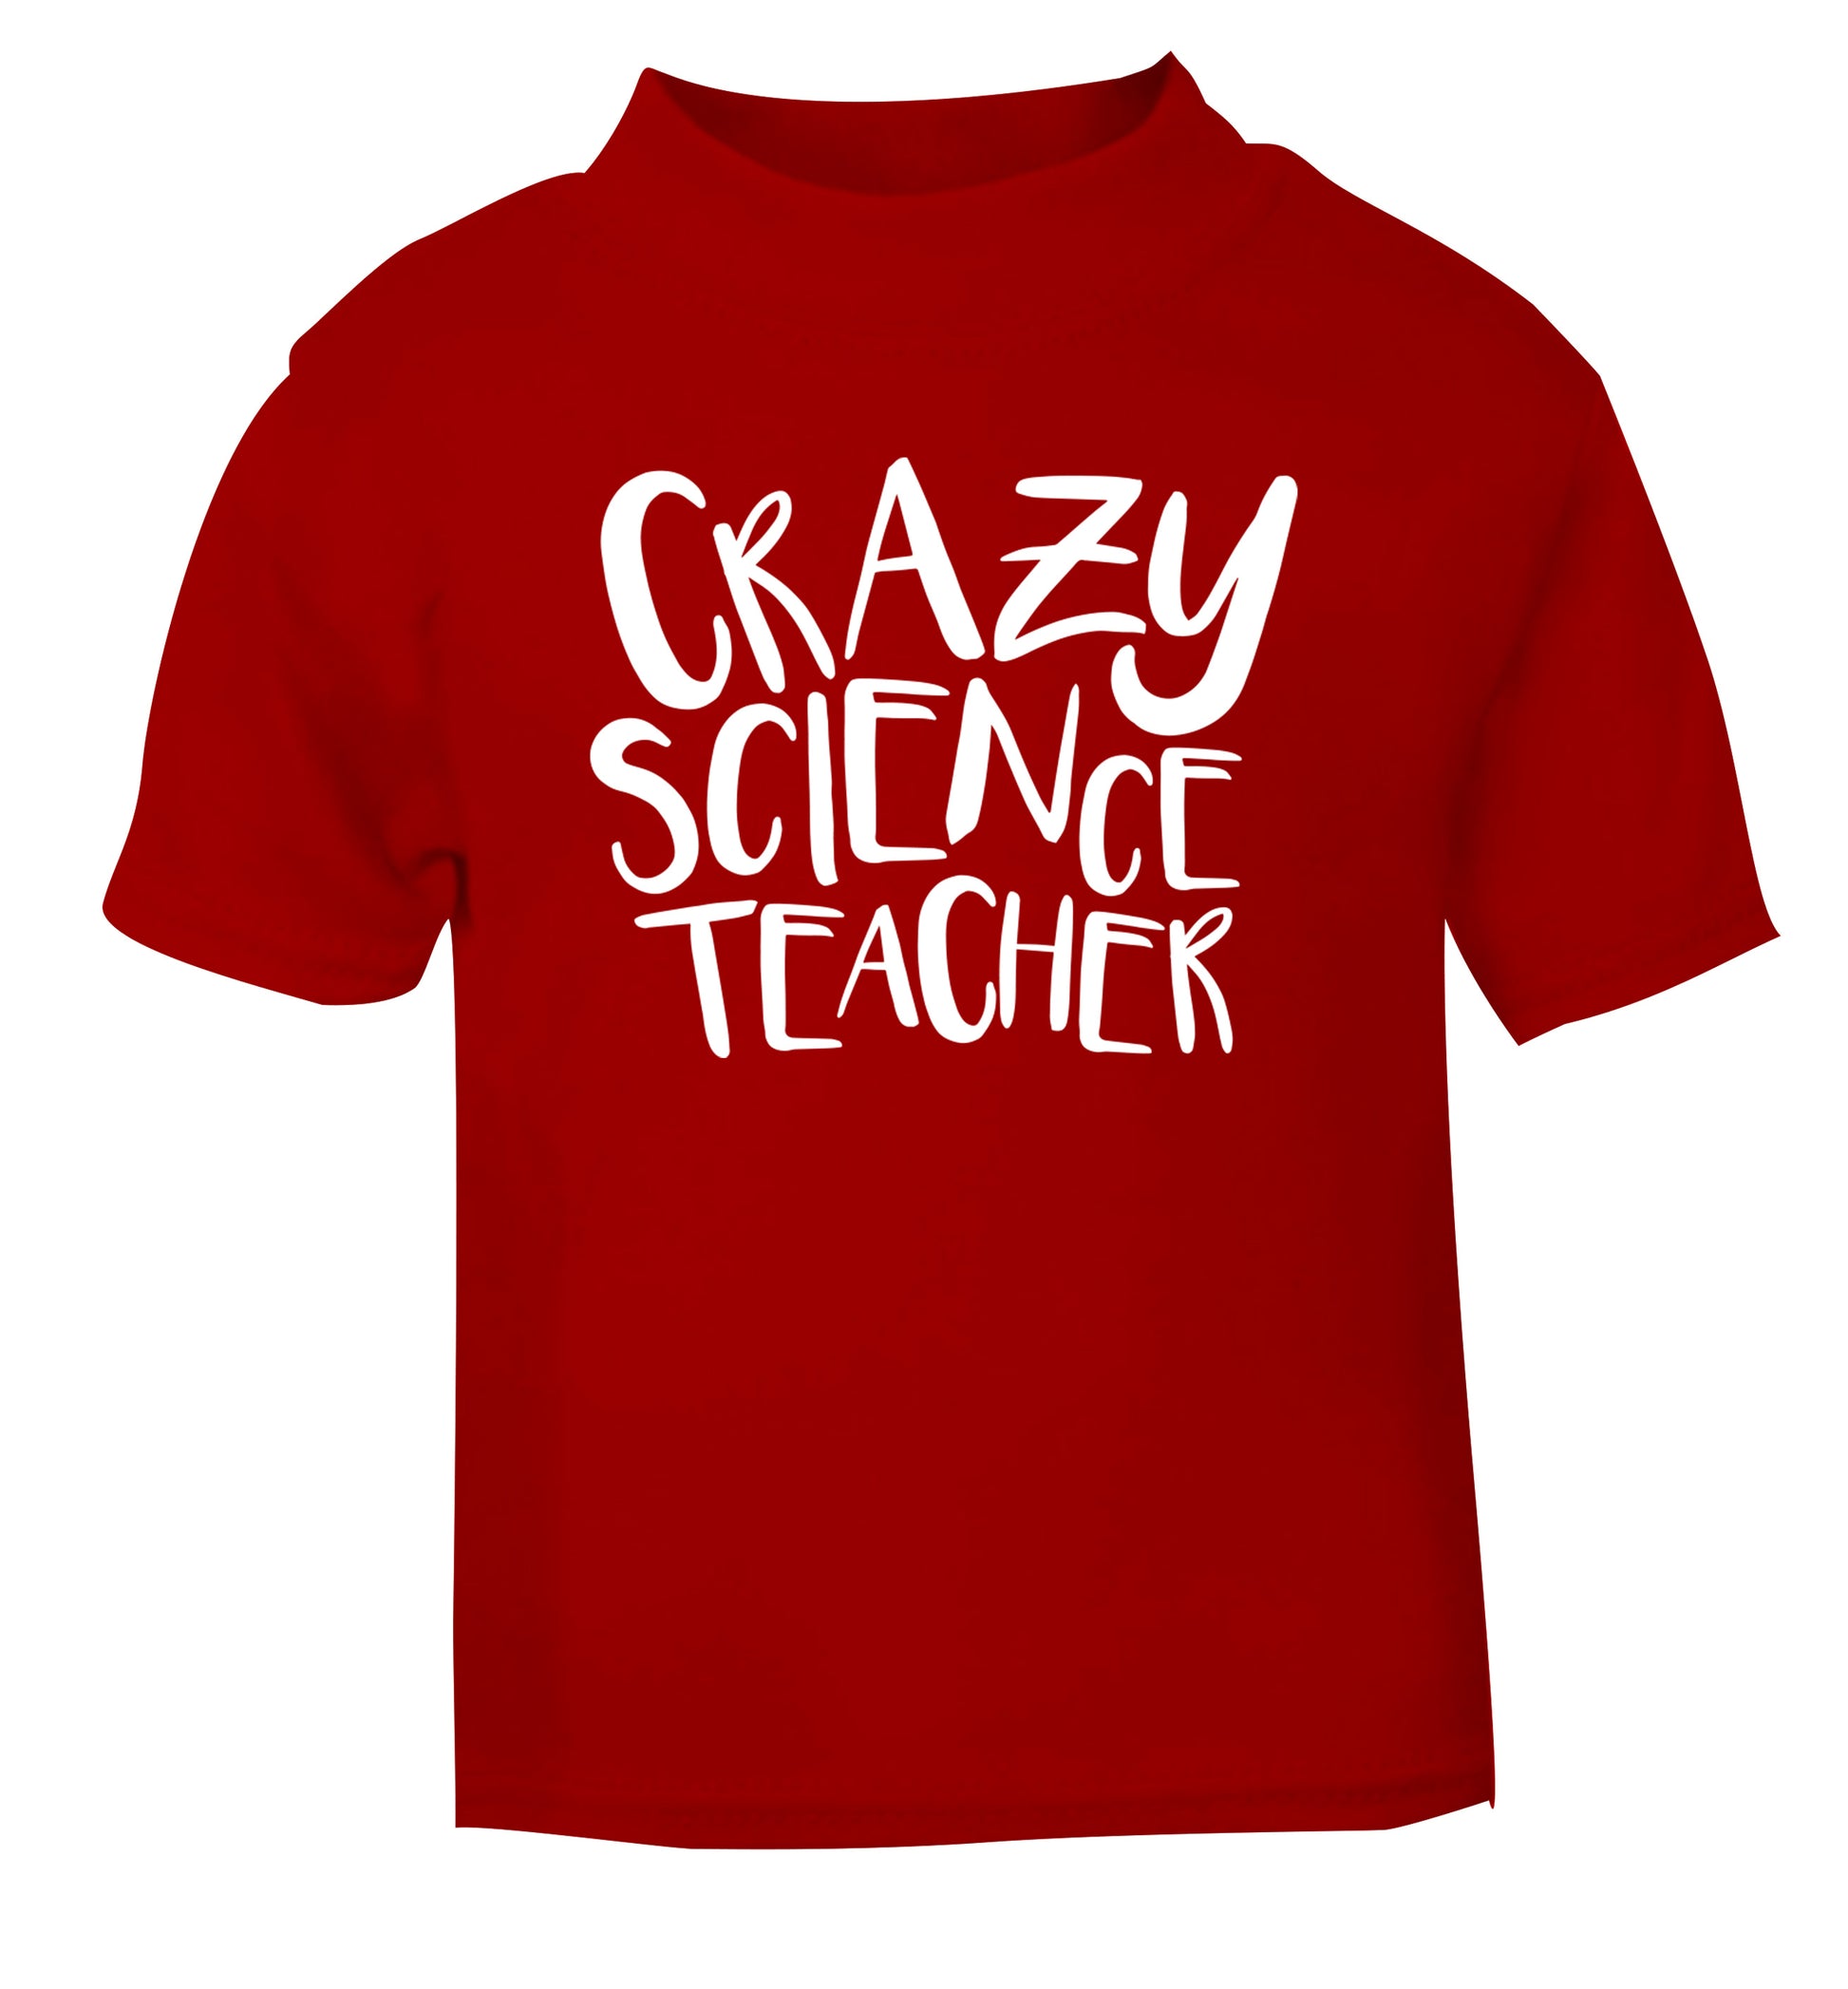 Crazy science teacher red Baby Toddler Tshirt 2 Years